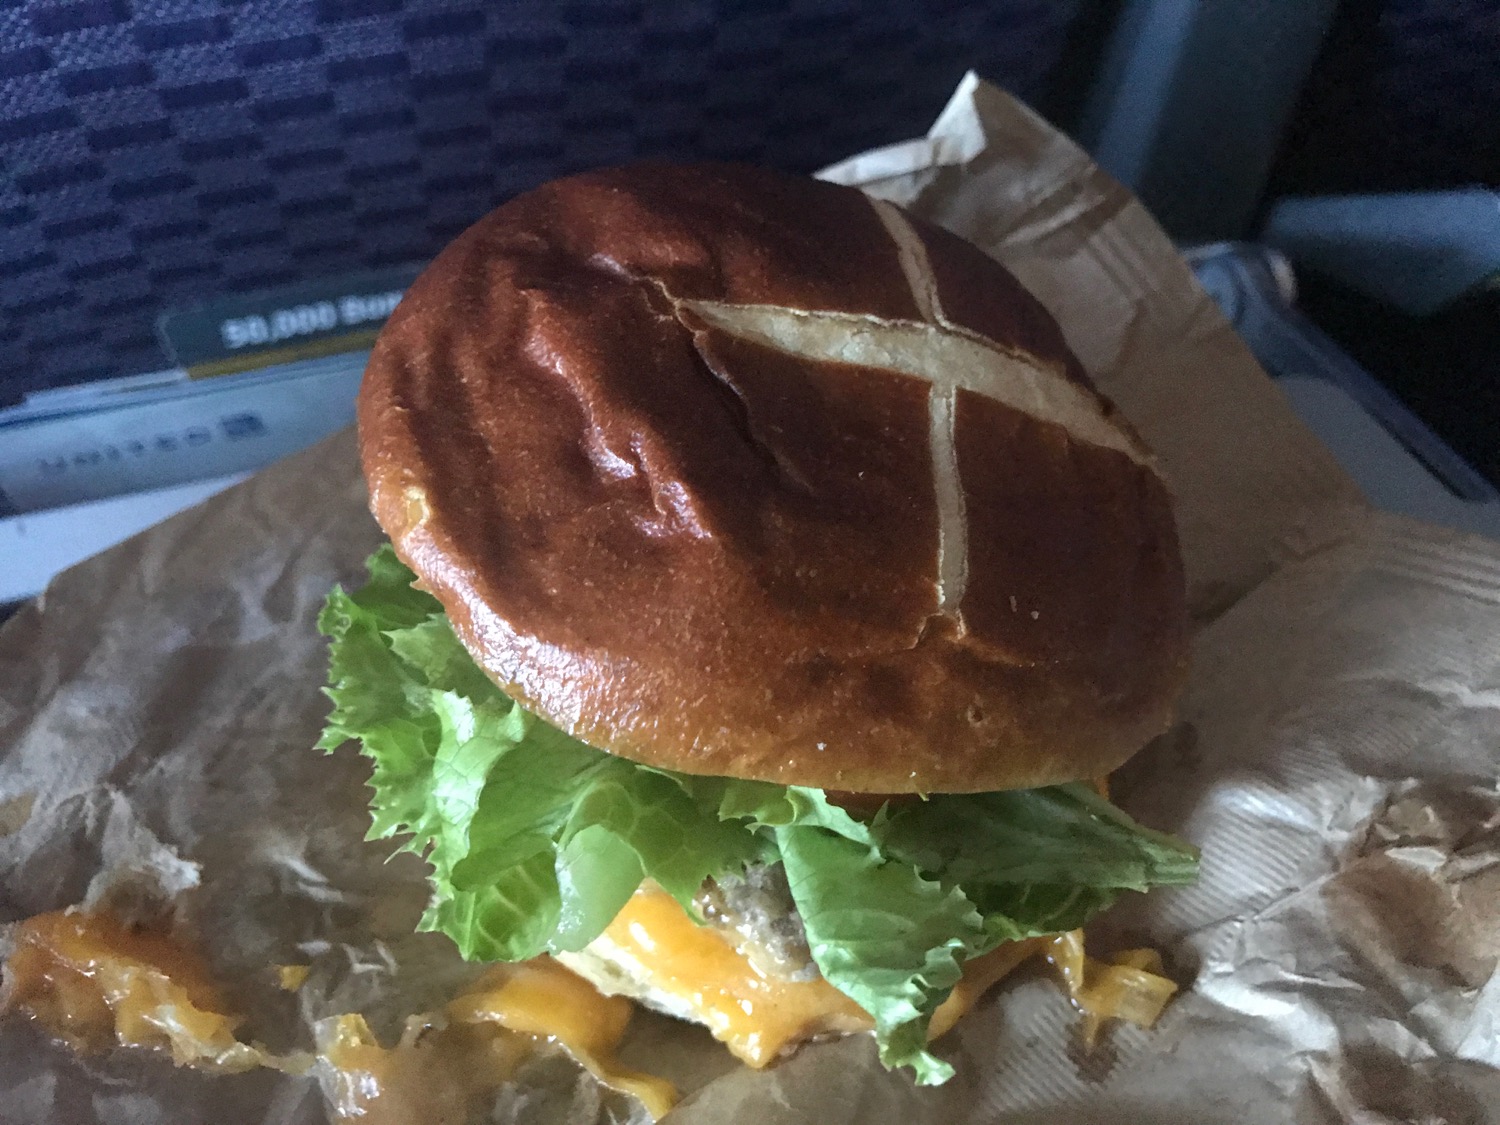 a burger on a paper wrapper